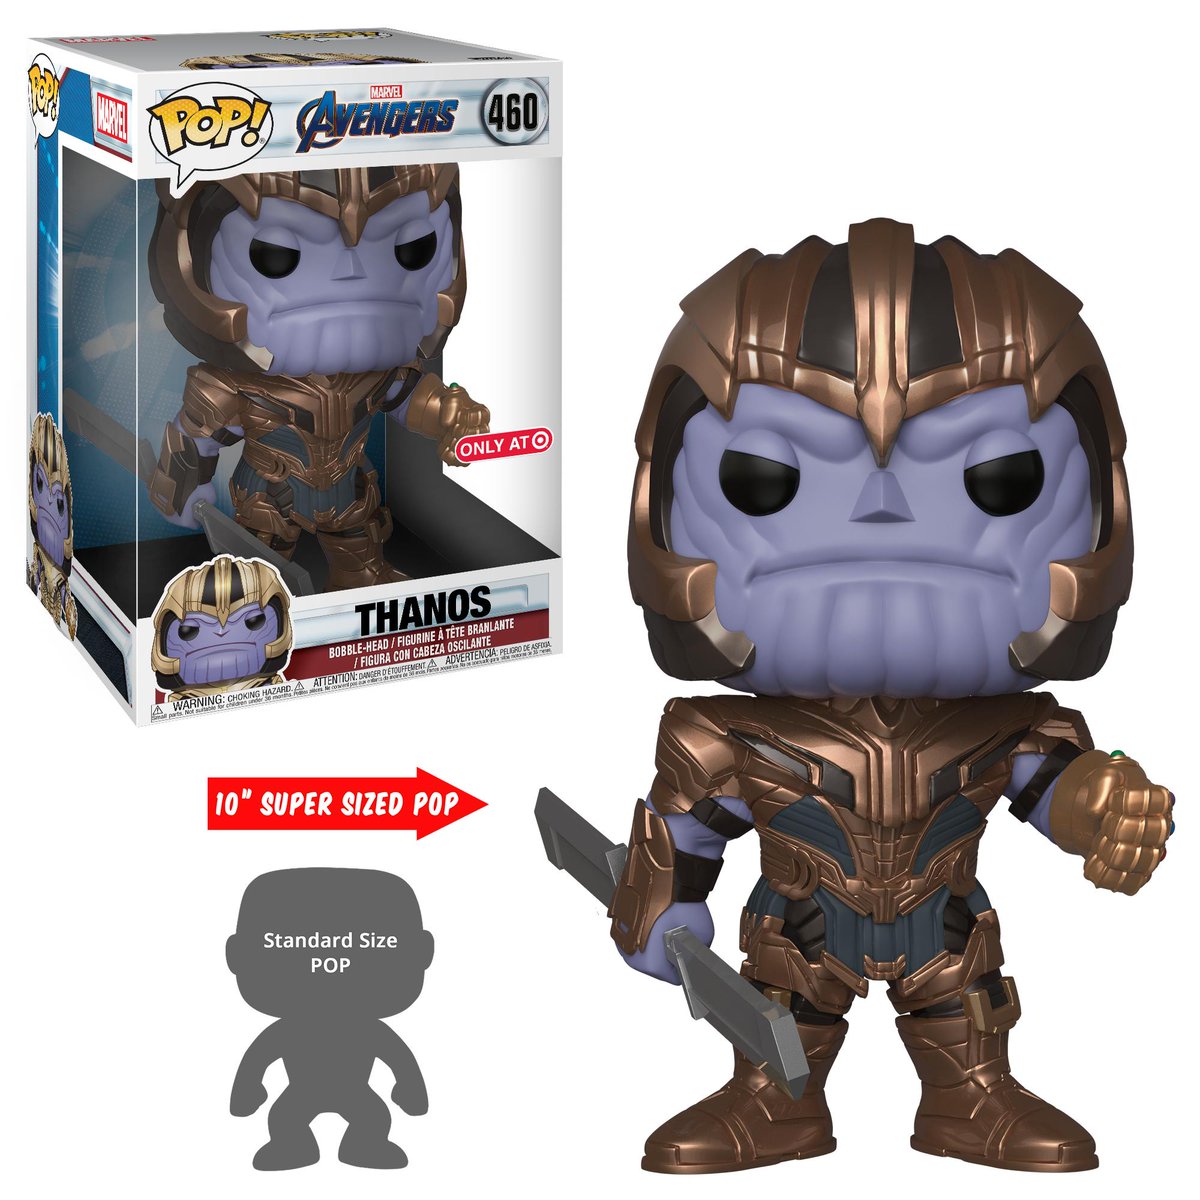 RT & follow @OriginalFunko for the chance to win a @Target exclusive 10-inch Thanos Pop! #AvengersEndgame #FunkoAvengers #BecomeALegend